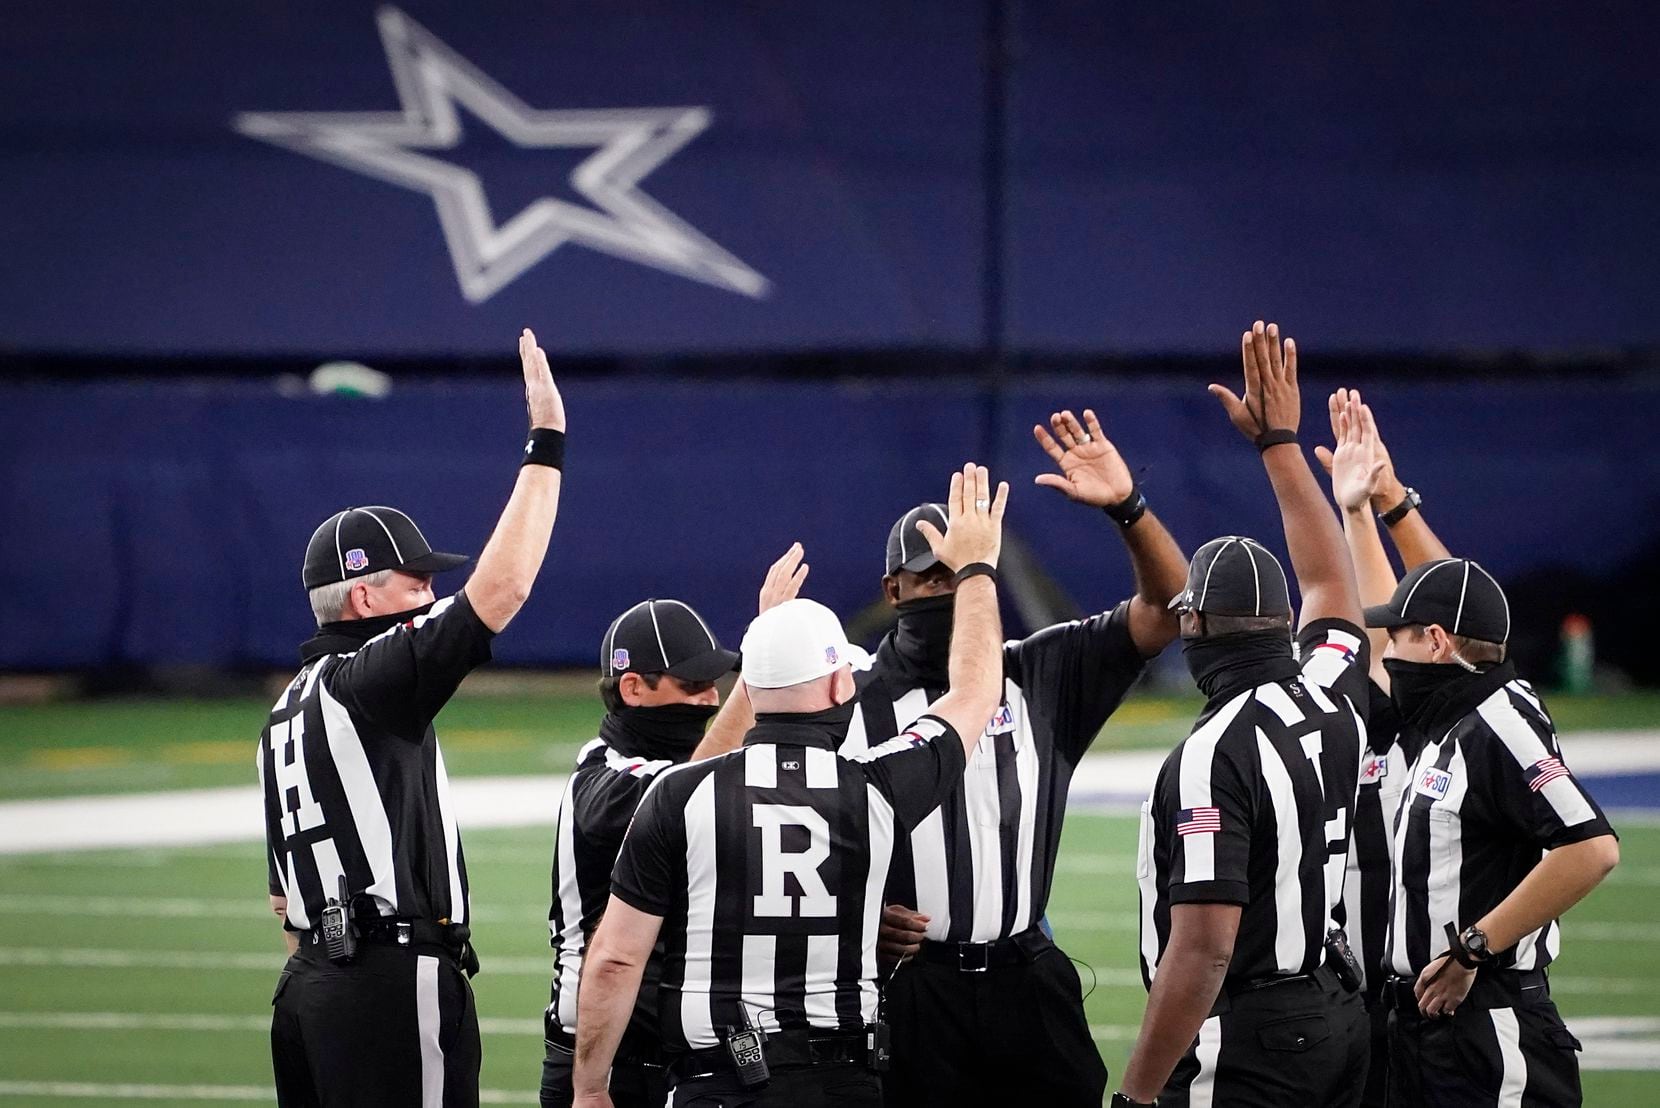 Officials huddle before the Class 5A Division I state football championship game between Denton Ryan and Cedar Park at AT&T Stadium on Friday, Jan. 15, 2021, in Arlington, Texas. (Smiley N. Pool/The Dallas Morning News)